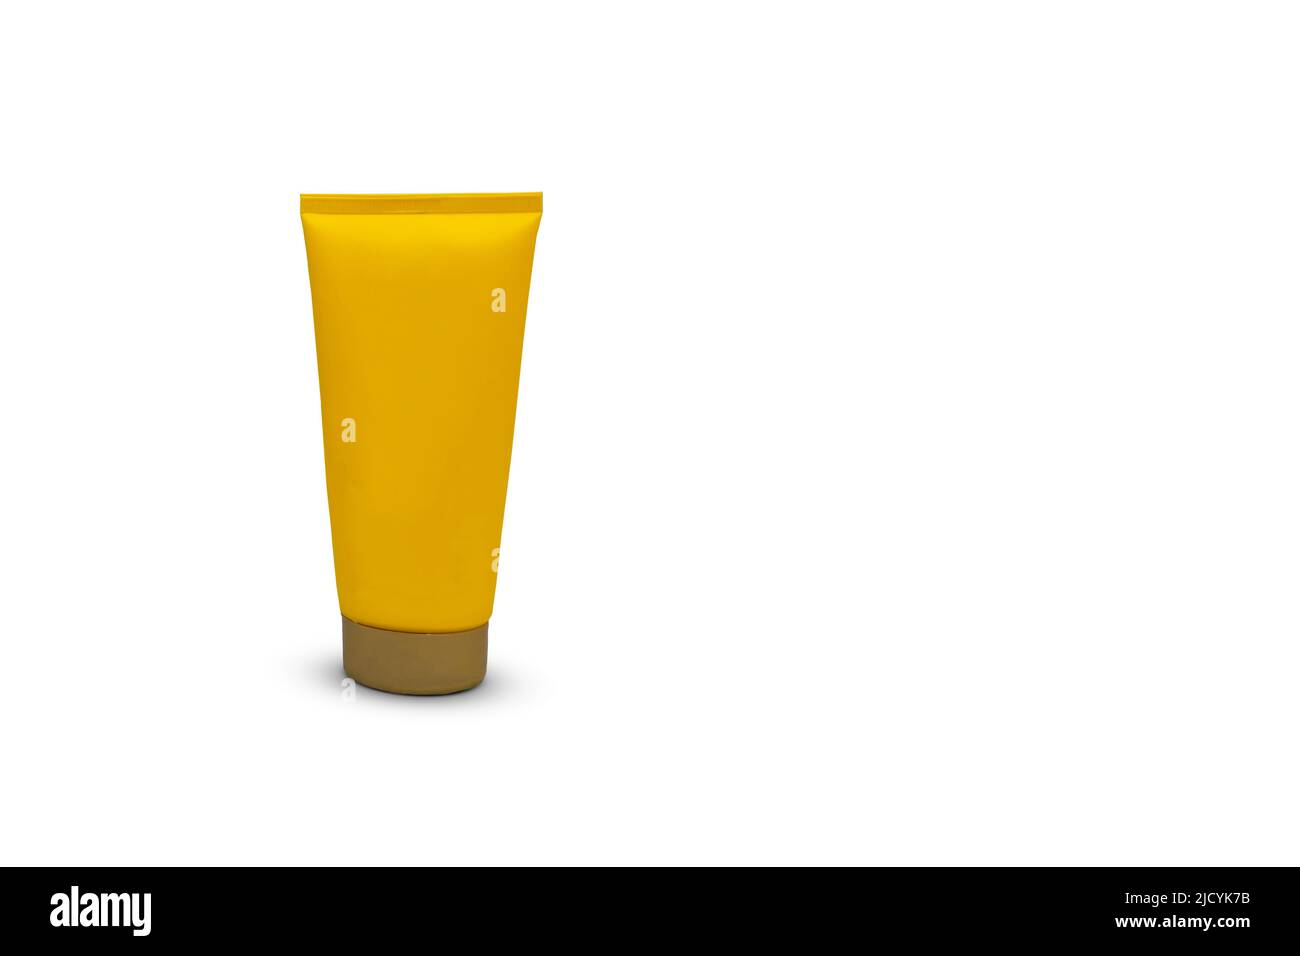 Yellow tube packaging for sunscreen, cosmetic and body care cream isolated on white background. Unbranded moisturizer tube. Stock Photo